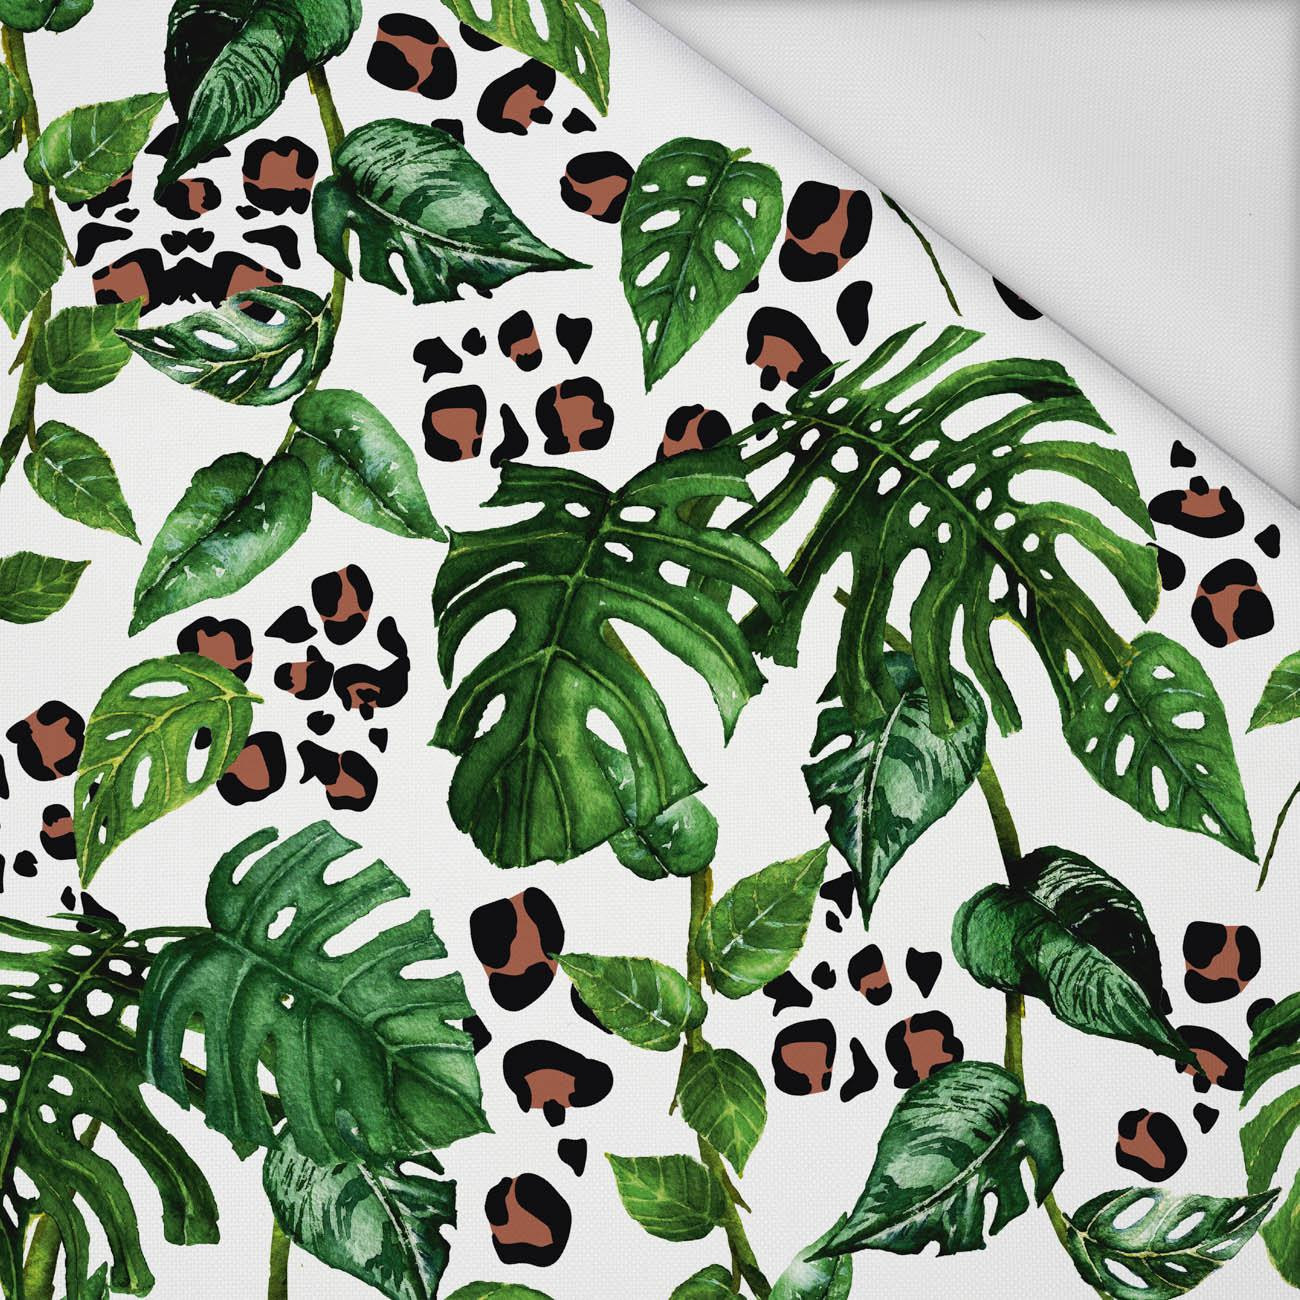 IN THE JUNGLE - Waterproof woven fabric